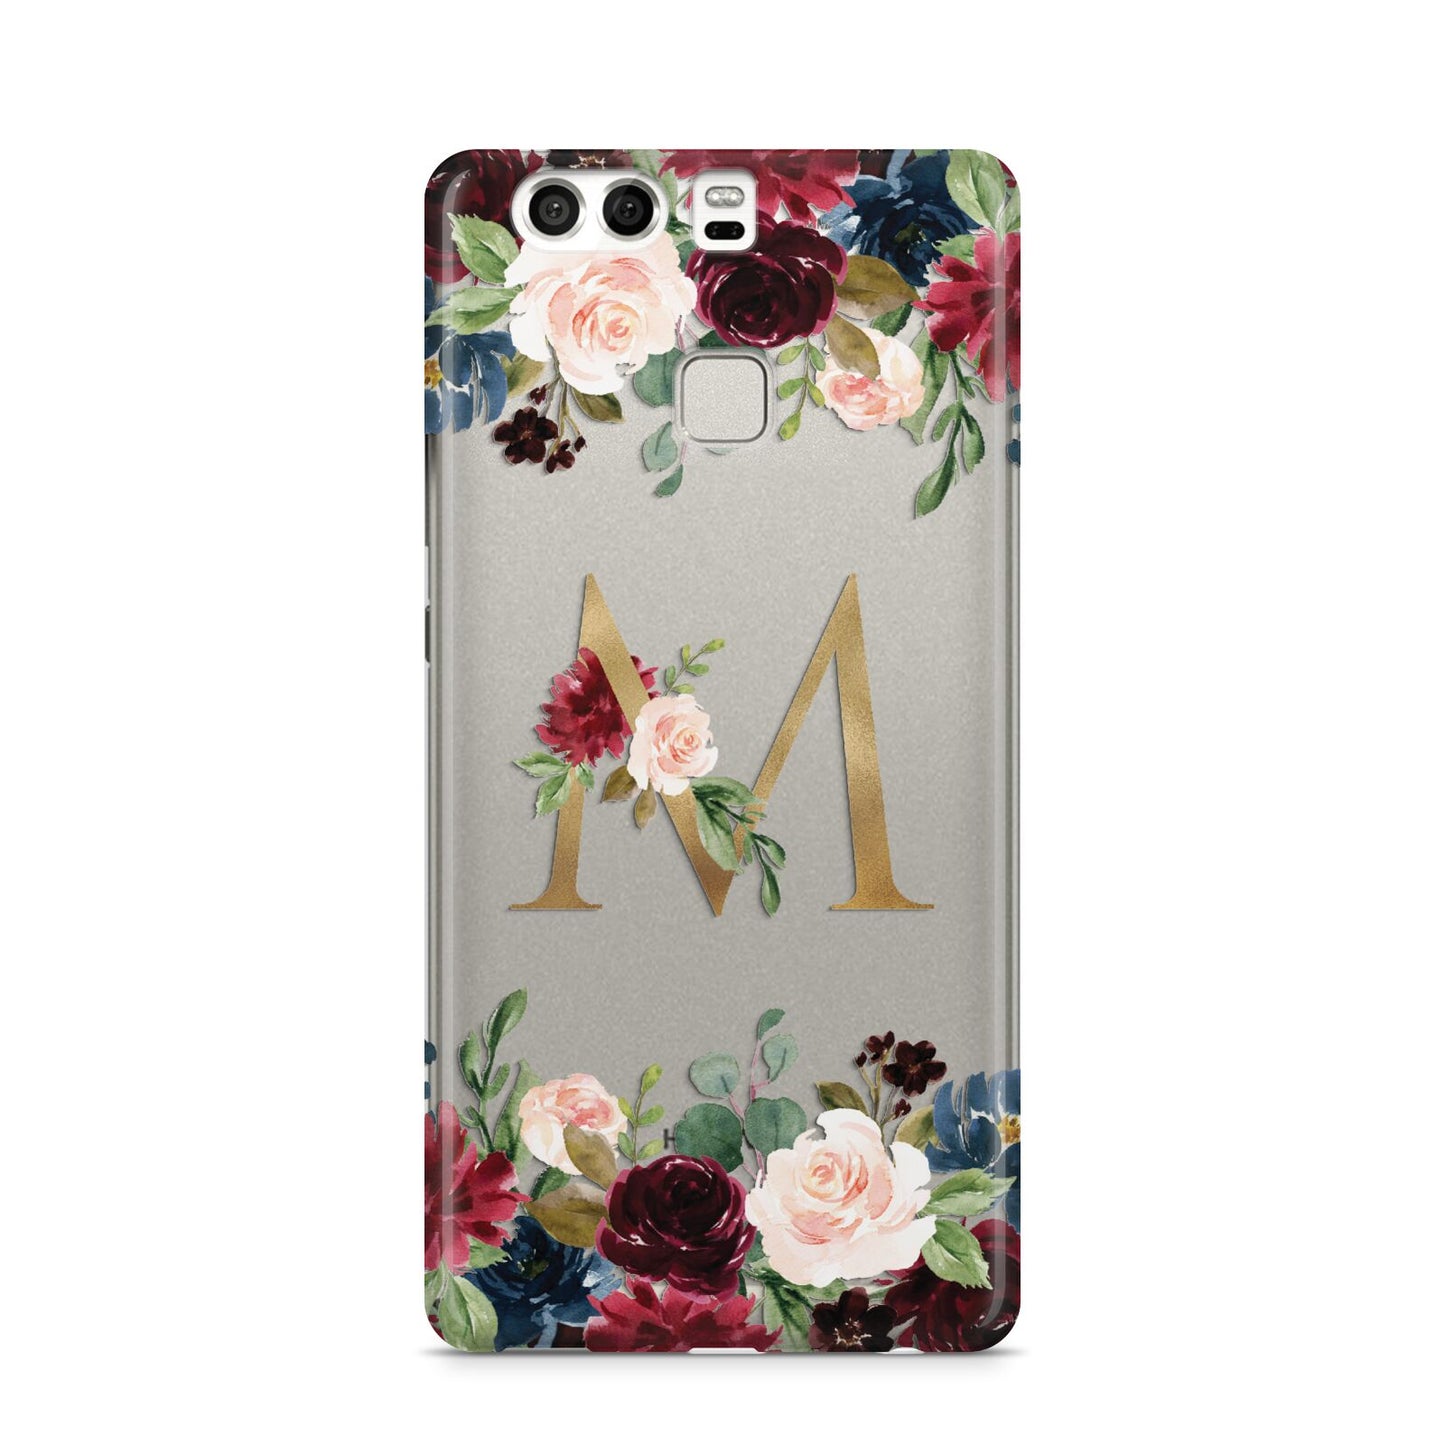 Personalised Clear Monogram Floral Huawei P9 Case